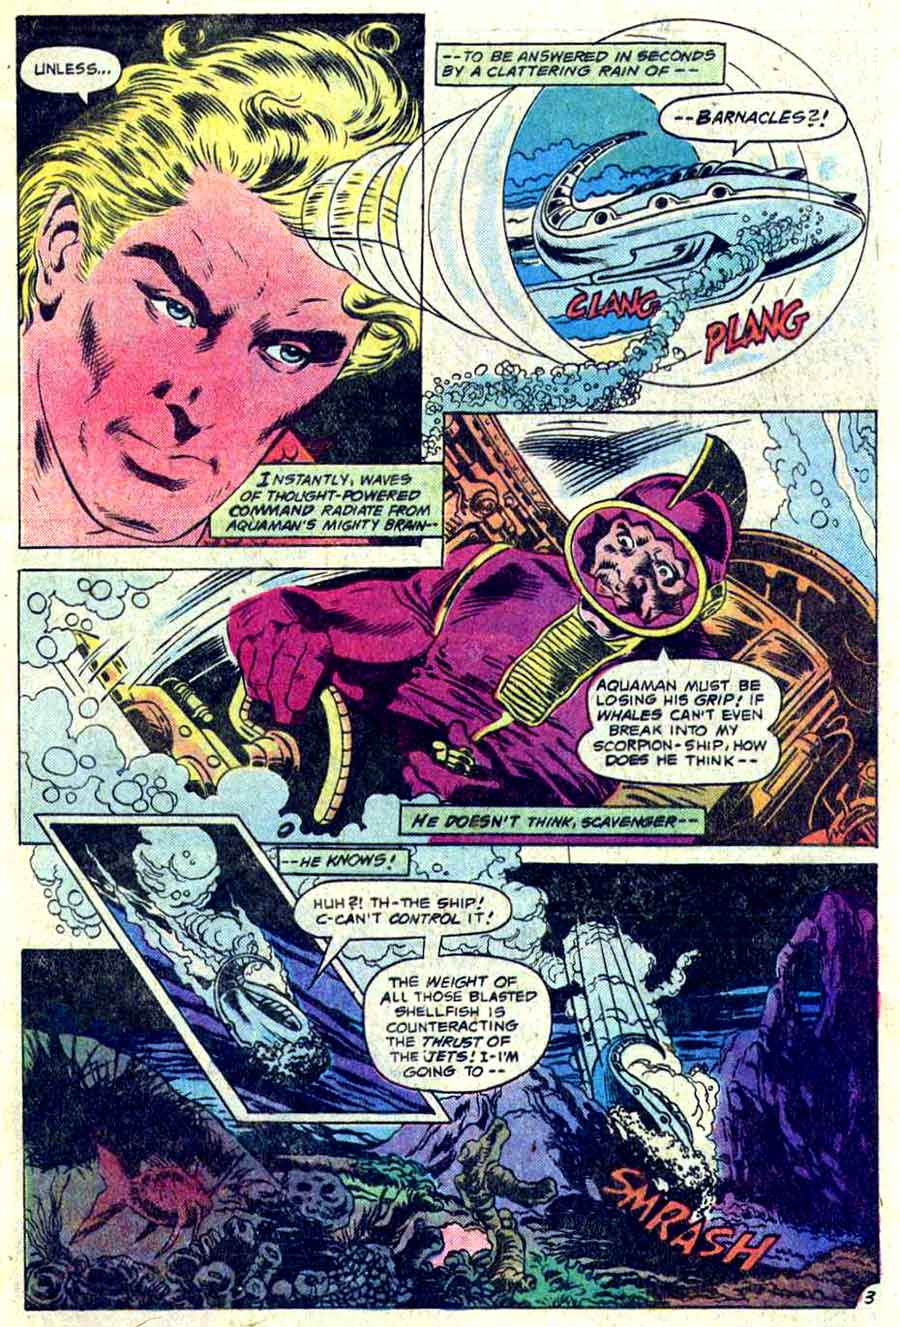 Aquaman v1 #60 dc 1970s bronze age comic book page art by Don Newton